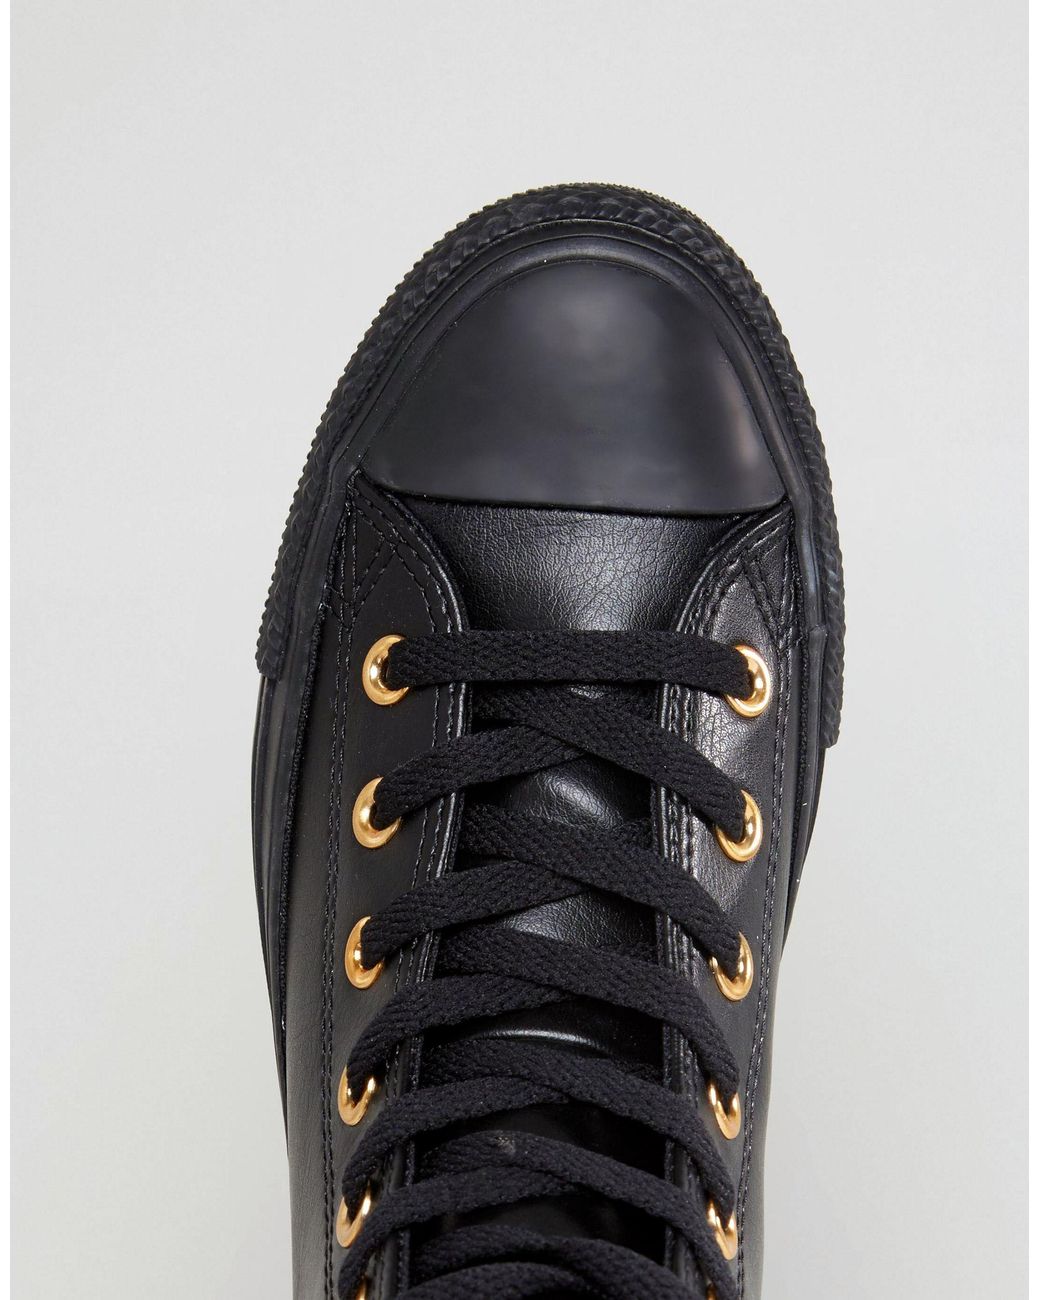 Converse Chuck Taylor Hi Top Sneakers In Black With Gold Eyelets | Lyst